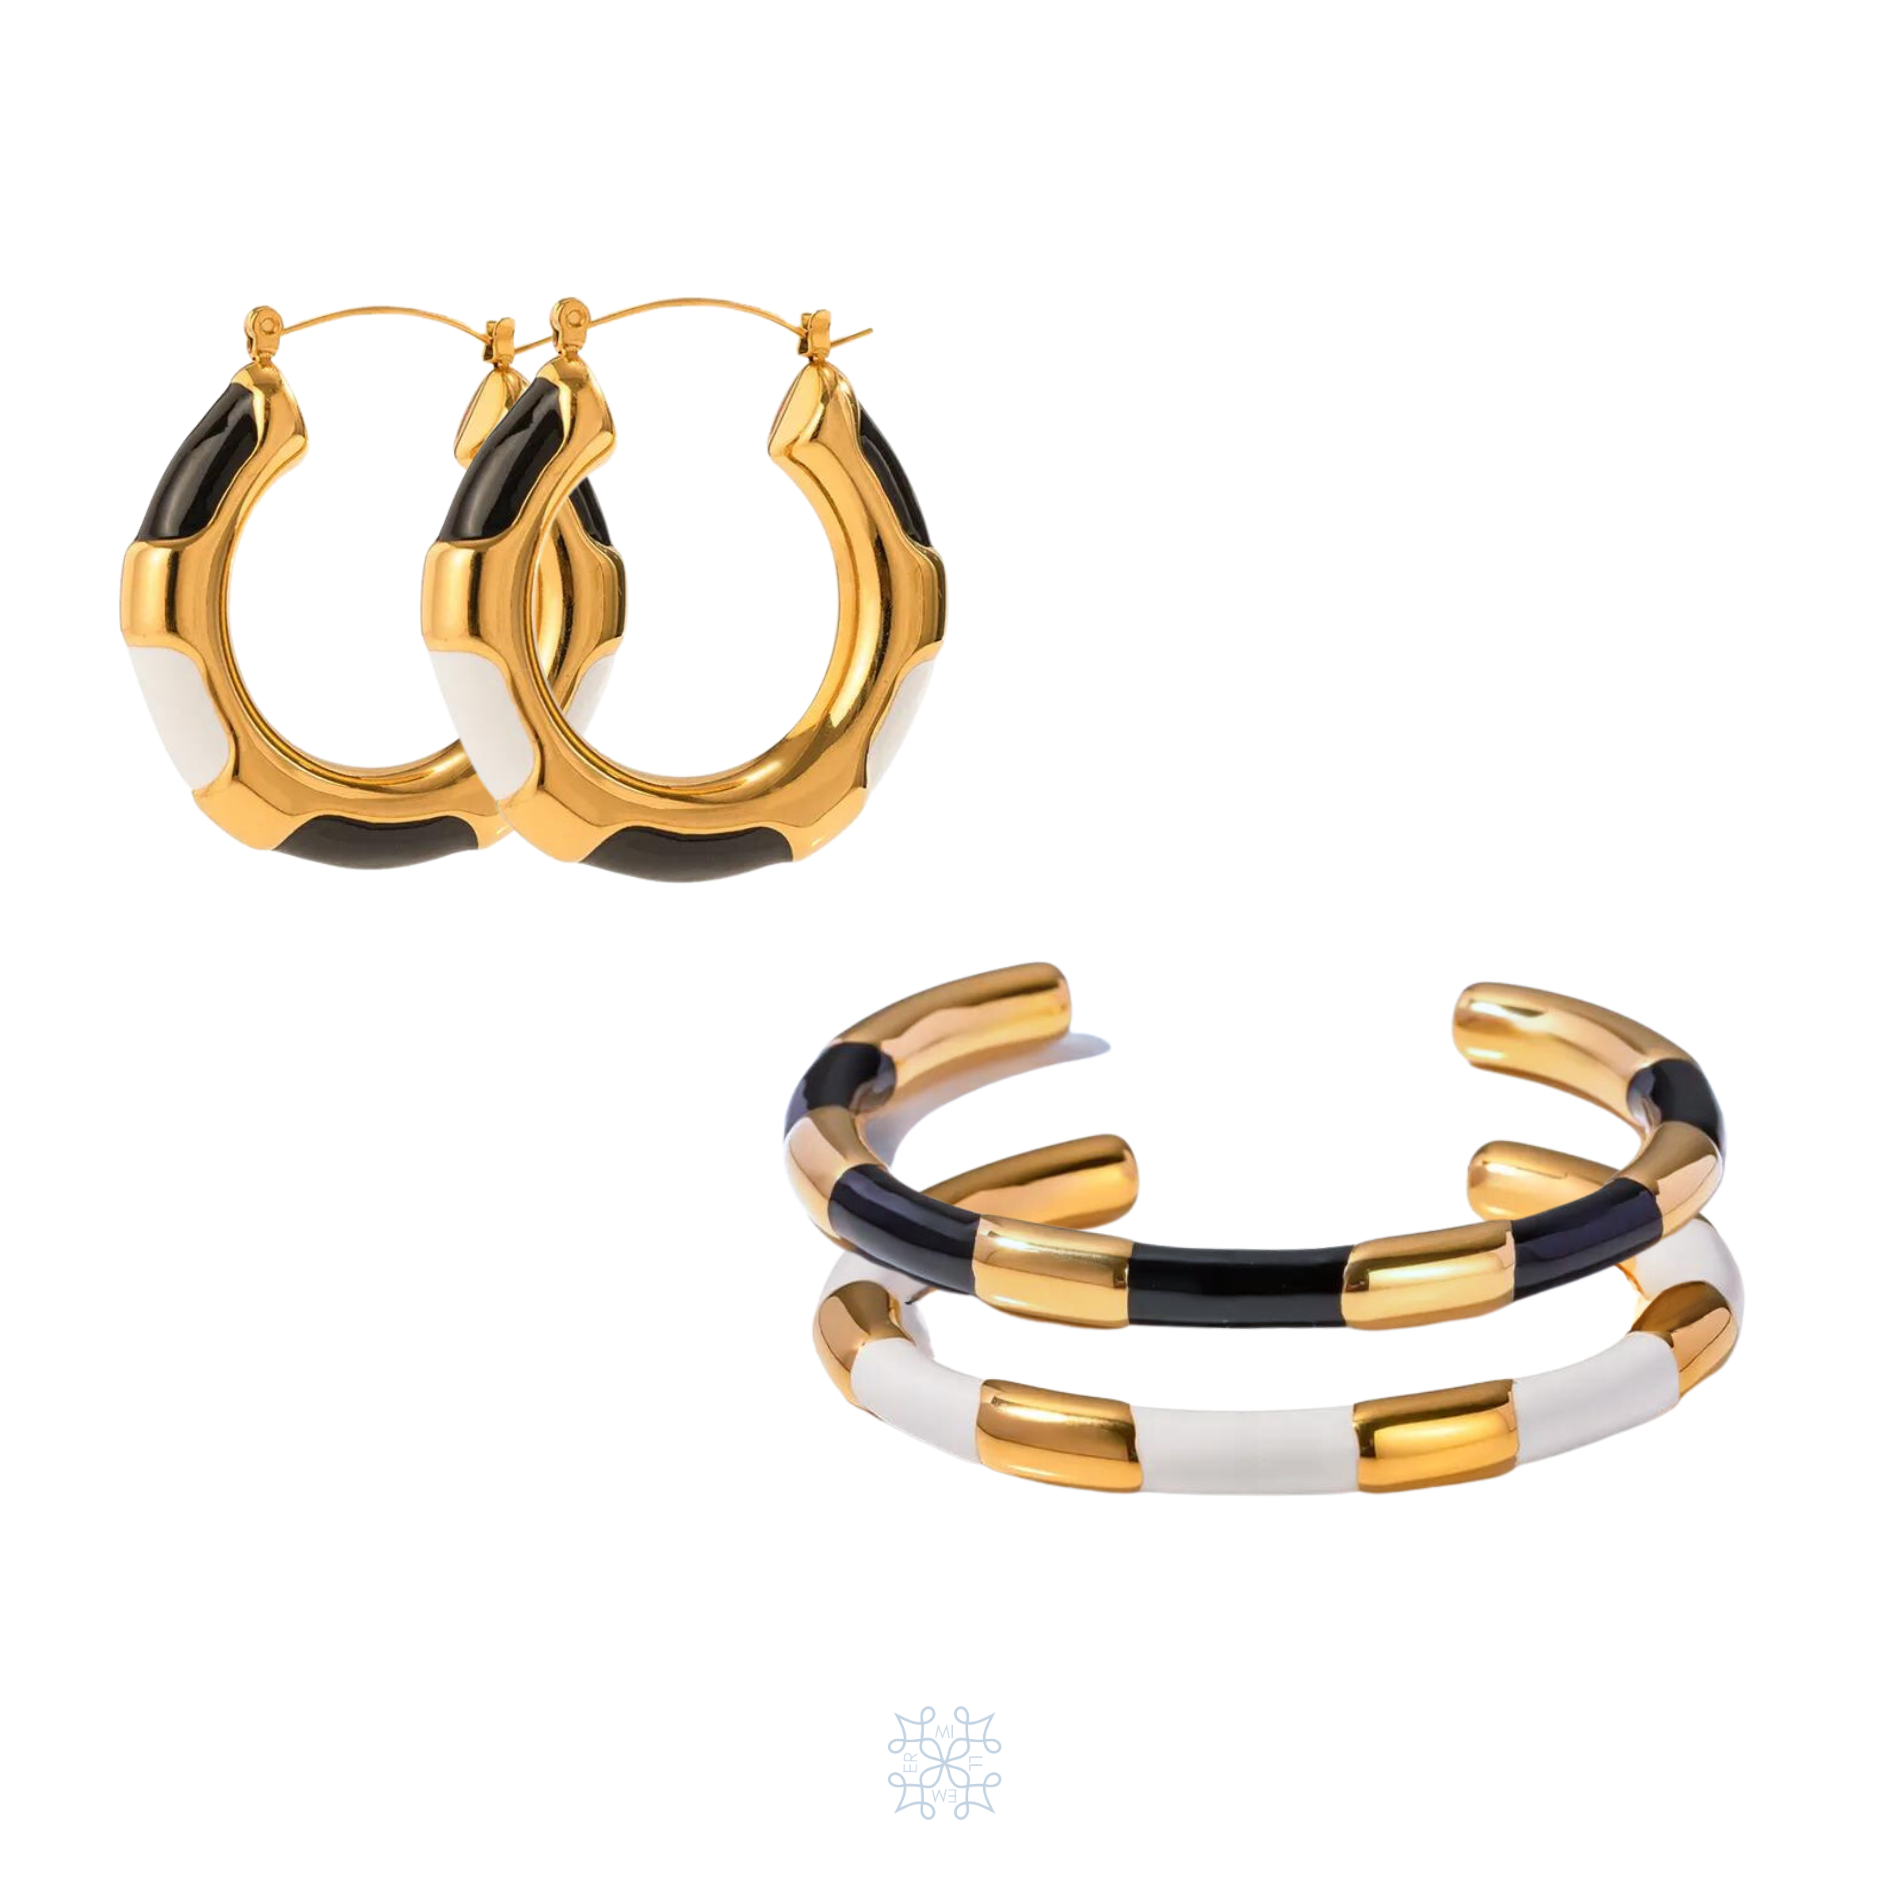 RUBAN White Black Enamel Gold Bundle Set. Jewelry set withone pair of hoop earrings and two bracelets.Bracelets painted in white and black enamel . Bangle bracelet. Gold Hoop earrings painted in white and black enamel.